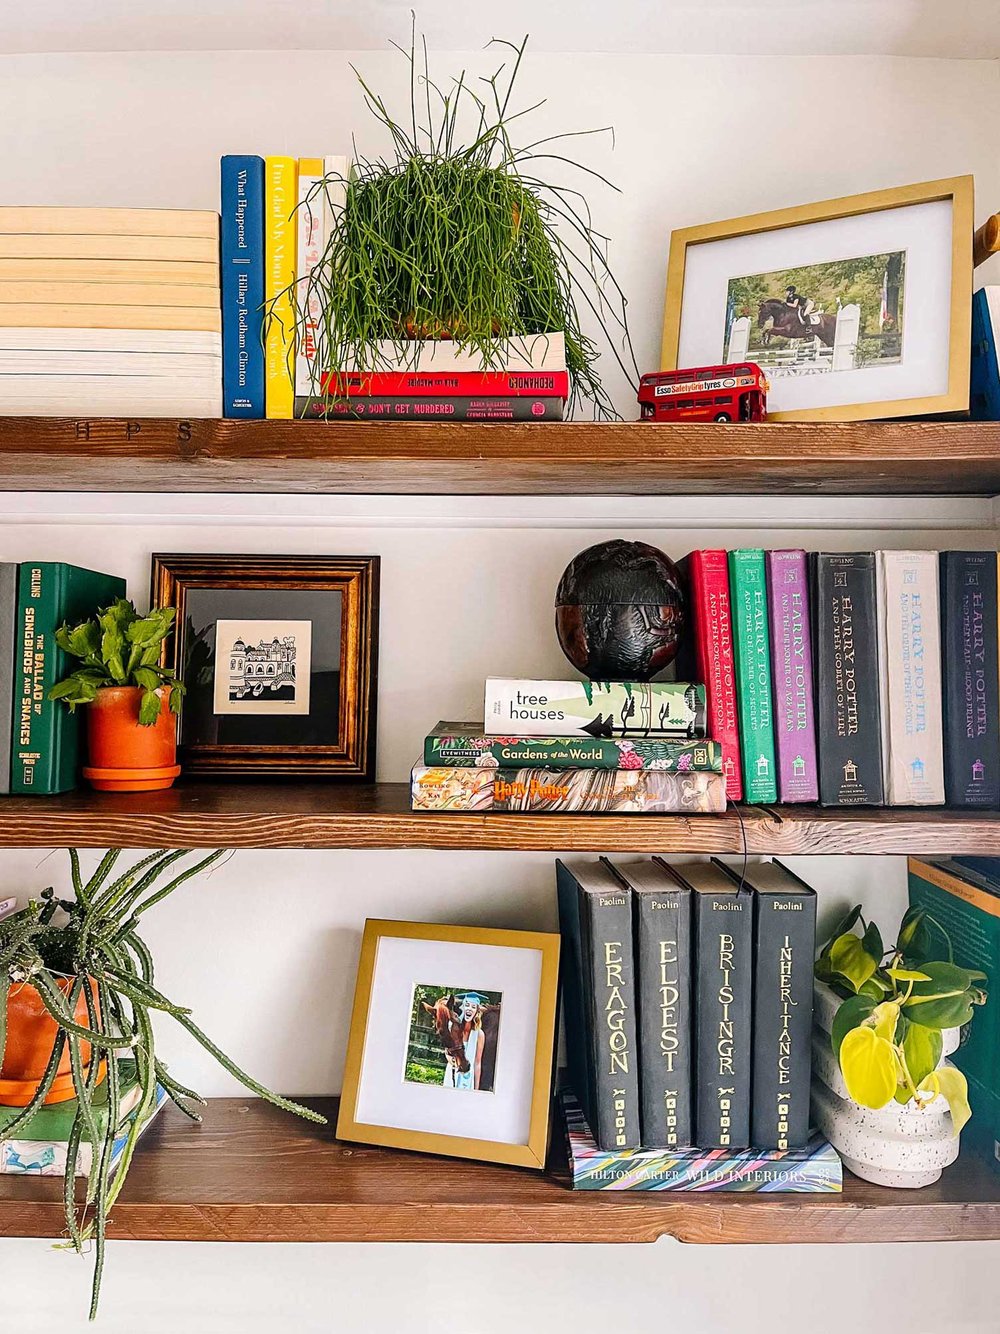 Built in shelves styled with books and plants